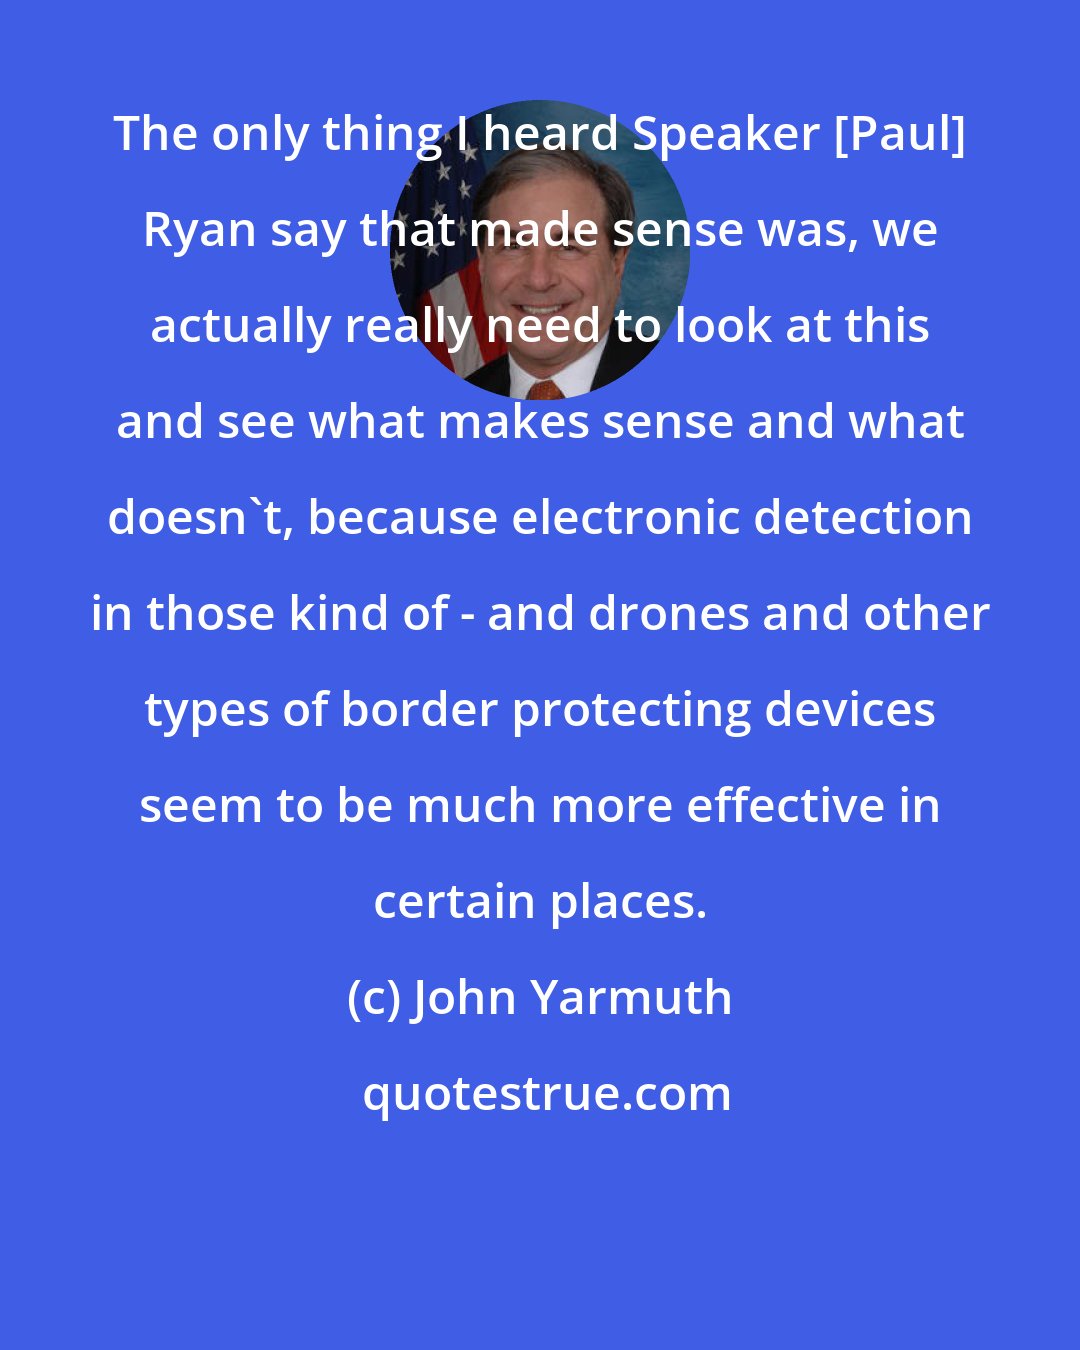 John Yarmuth: The only thing I heard Speaker [Paul] Ryan say that made sense was, we actually really need to look at this and see what makes sense and what doesn`t, because electronic detection in those kind of - and drones and other types of border protecting devices seem to be much more effective in certain places.